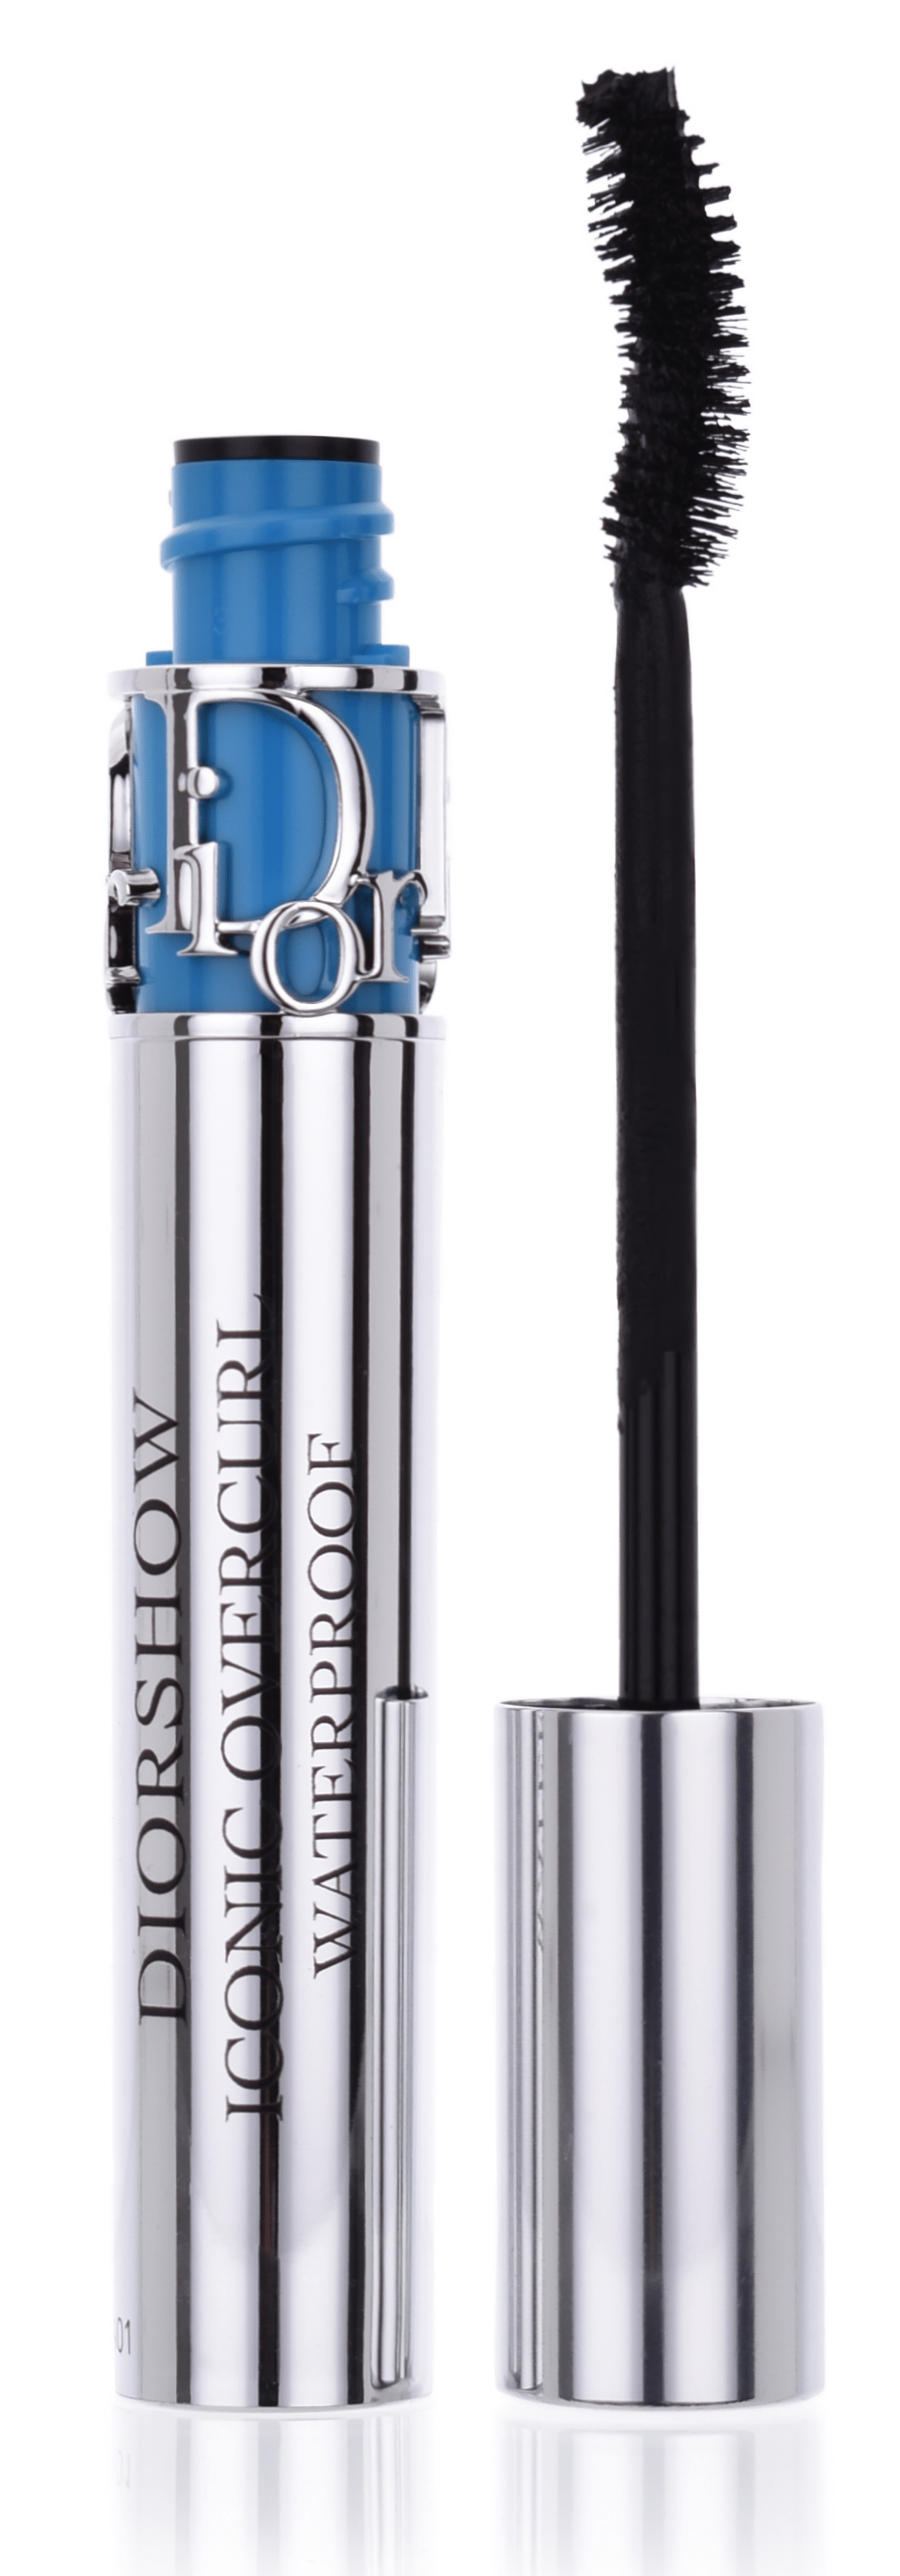 Dior Diorshow Iconic Overcurl Mascara WP Professionnel Volume & Coubre Spectaculaires 091 Black